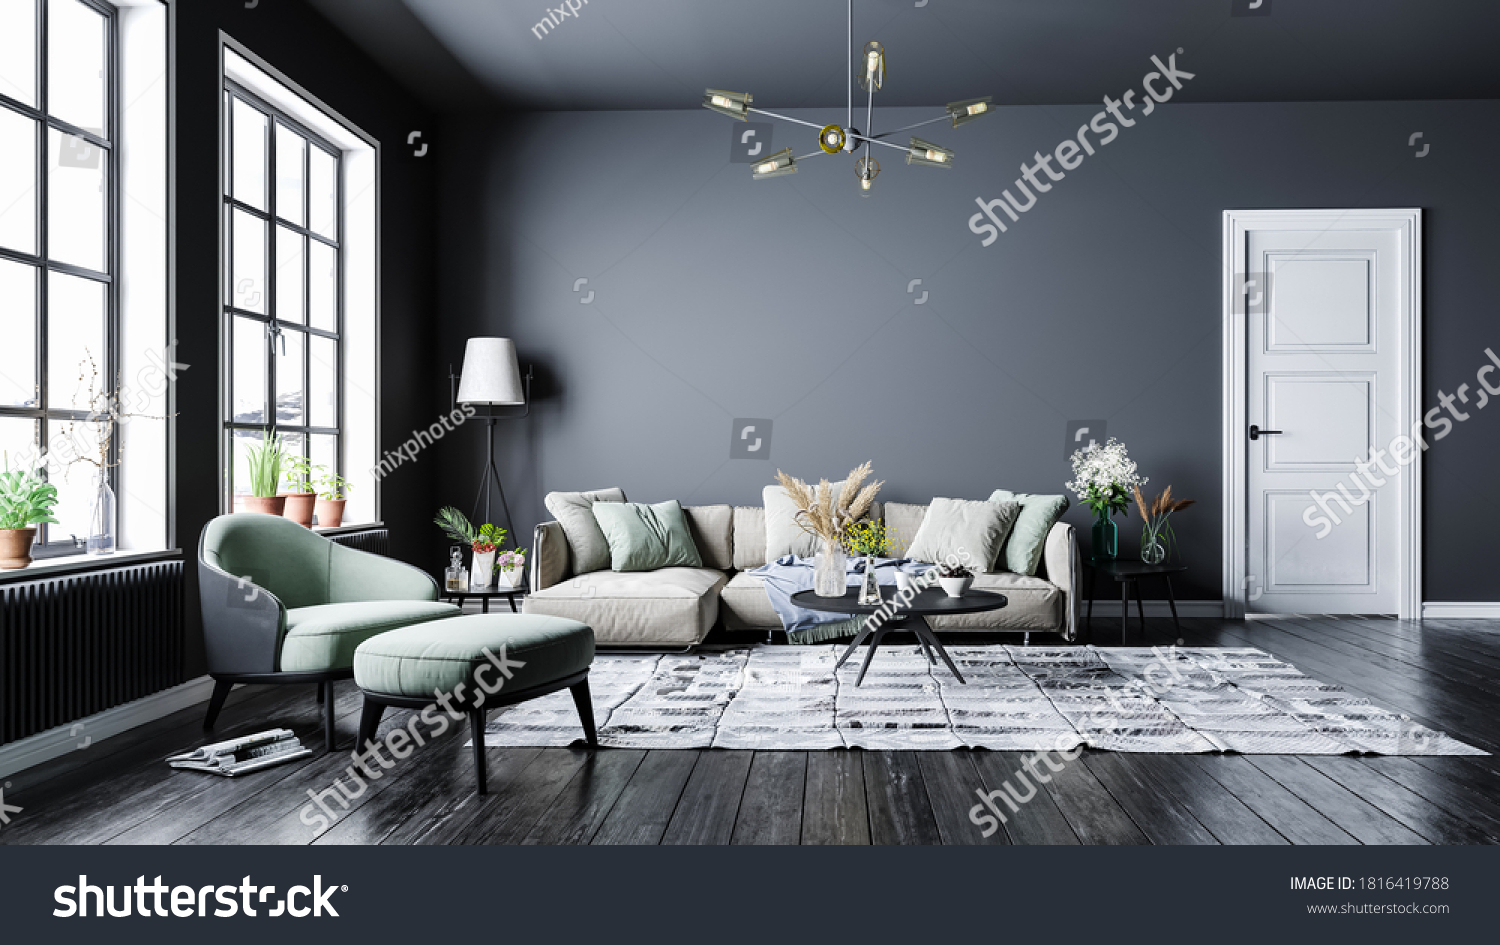 Modern interior design, in a spacious room, next to a table with flowers against a gray wall.Bright, spacious room with a comfortable sofa, plants and elegant accessories. #1816419788